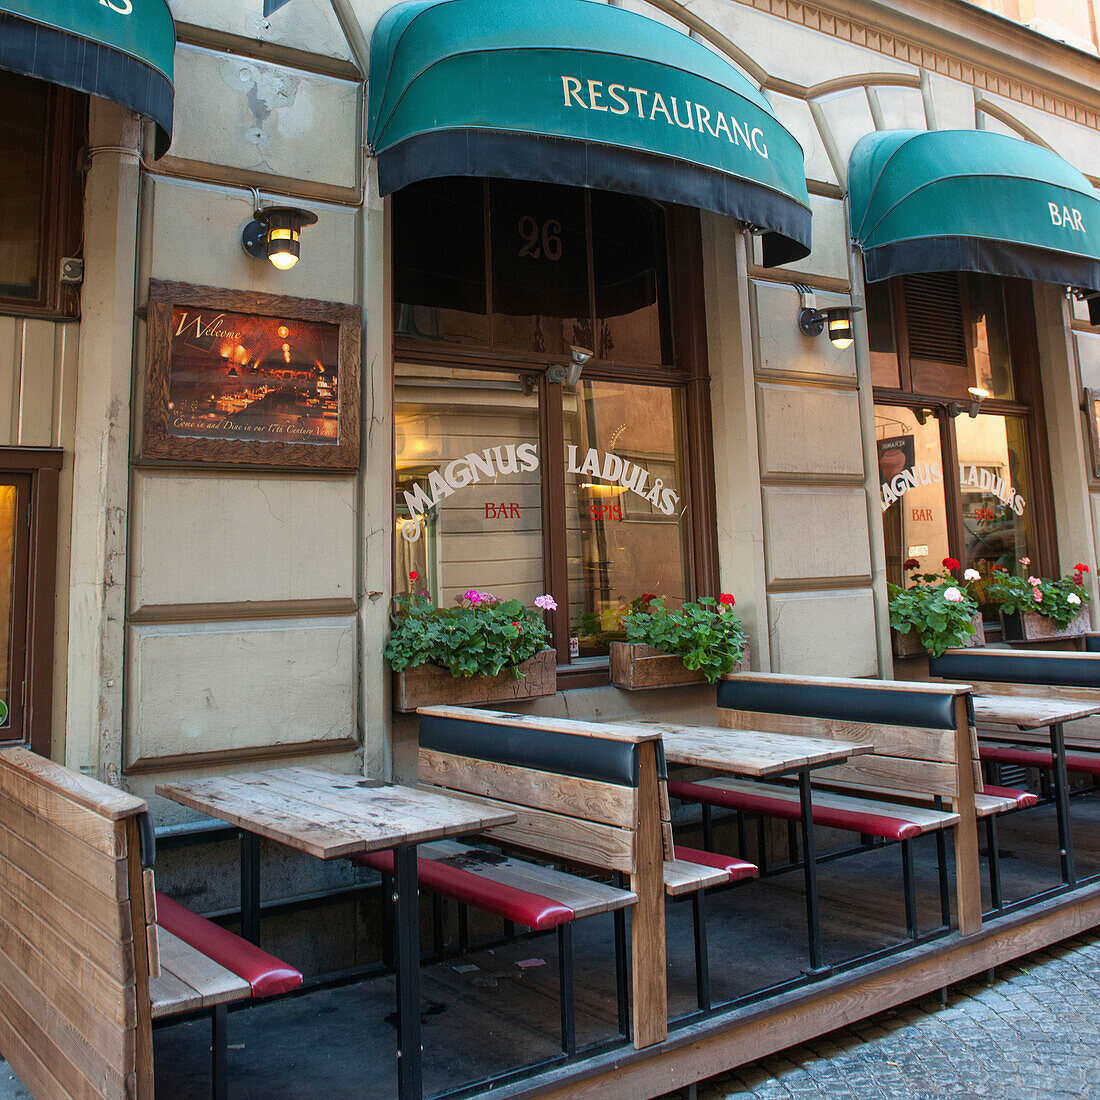 Tables And Benches On An Outdoor Restaurant Patio; Stockholm Sweden